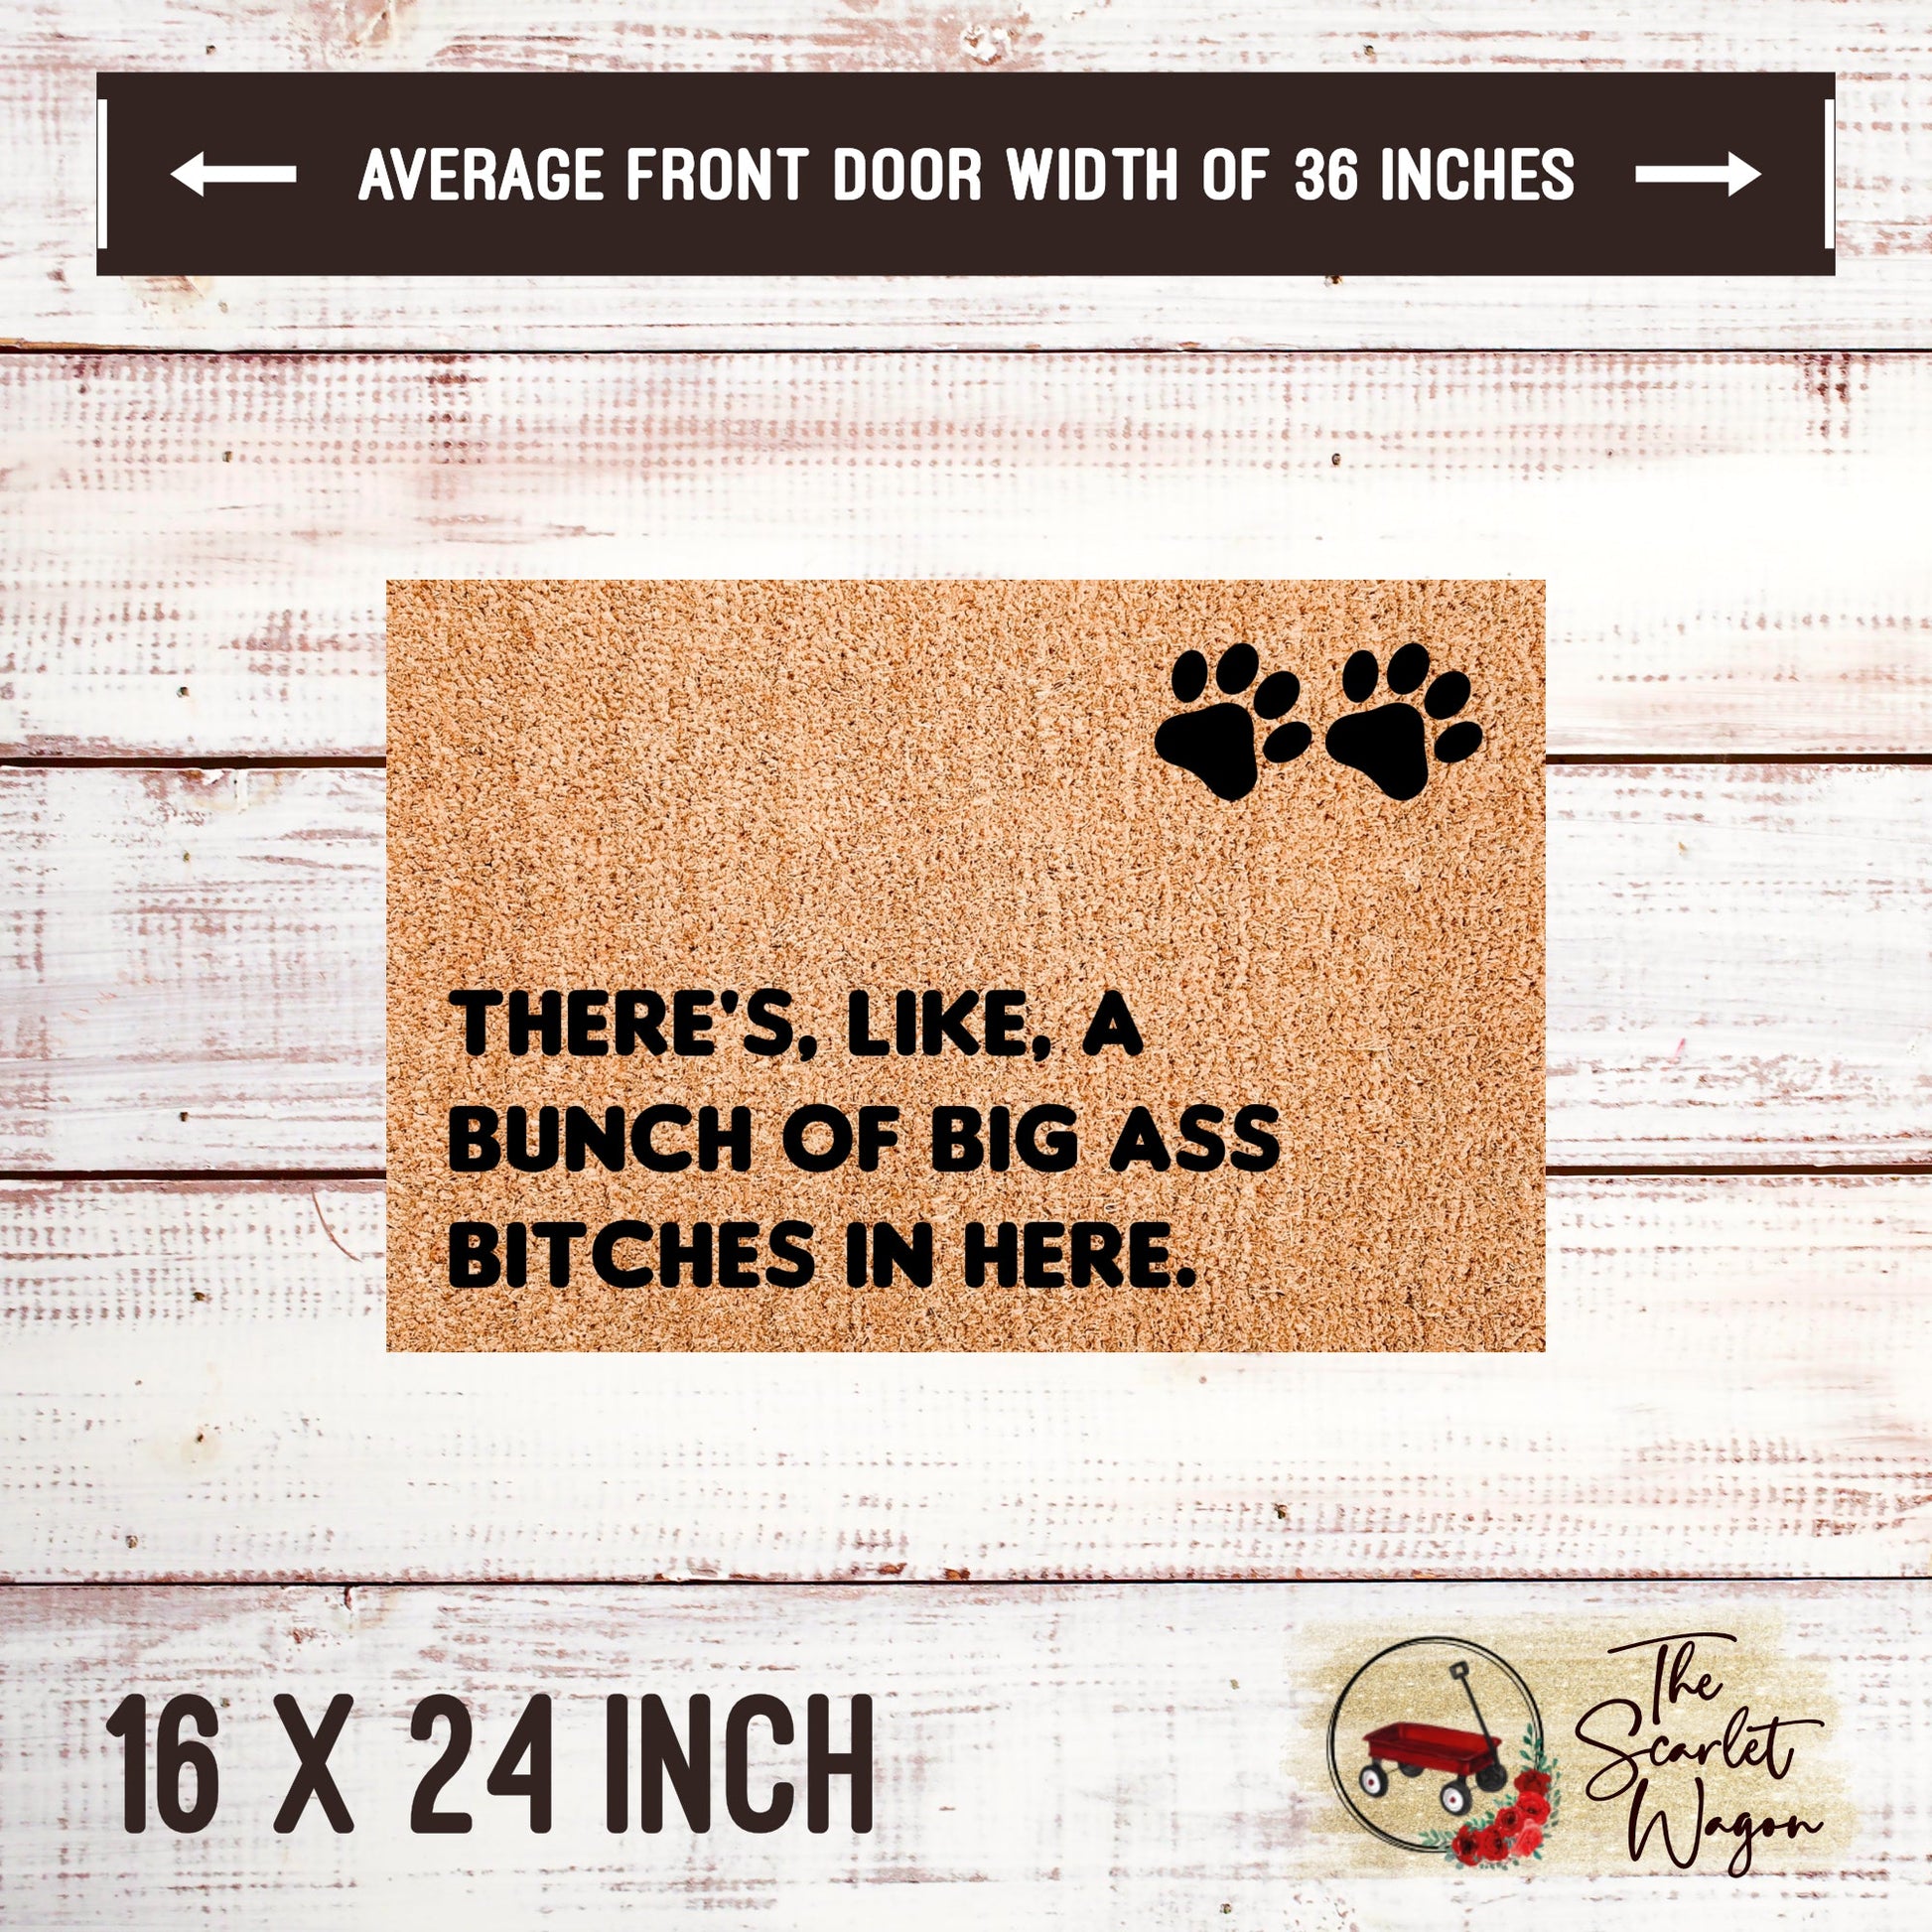 Bunch of Big Ass Bitches in Here Door Mats teelaunch 16x24 Inches (Free Shipping) 